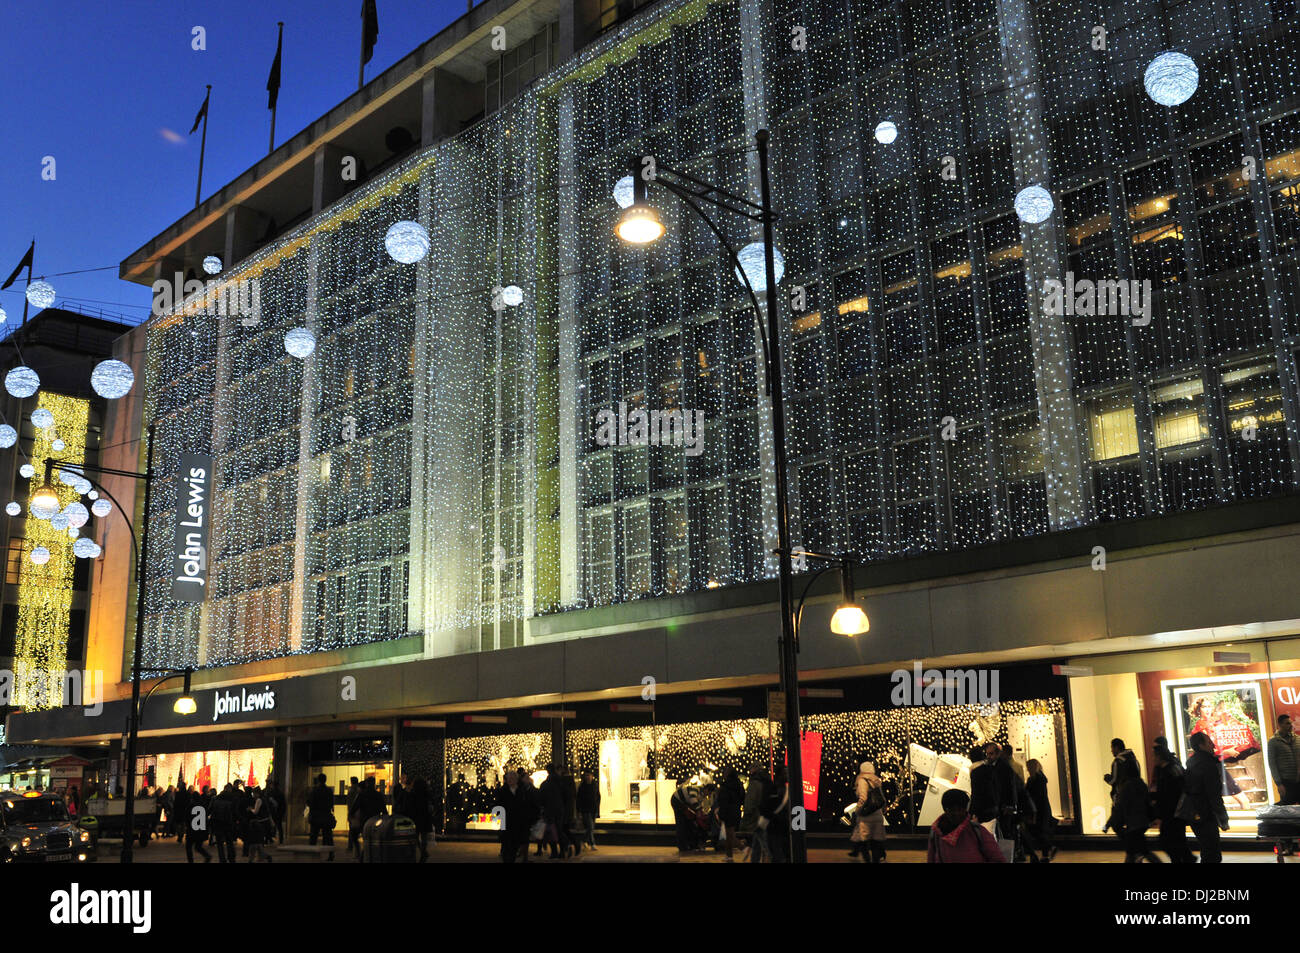 A close up view of John Lewis on Oxford Street, with Christmas decorations Stock Photo